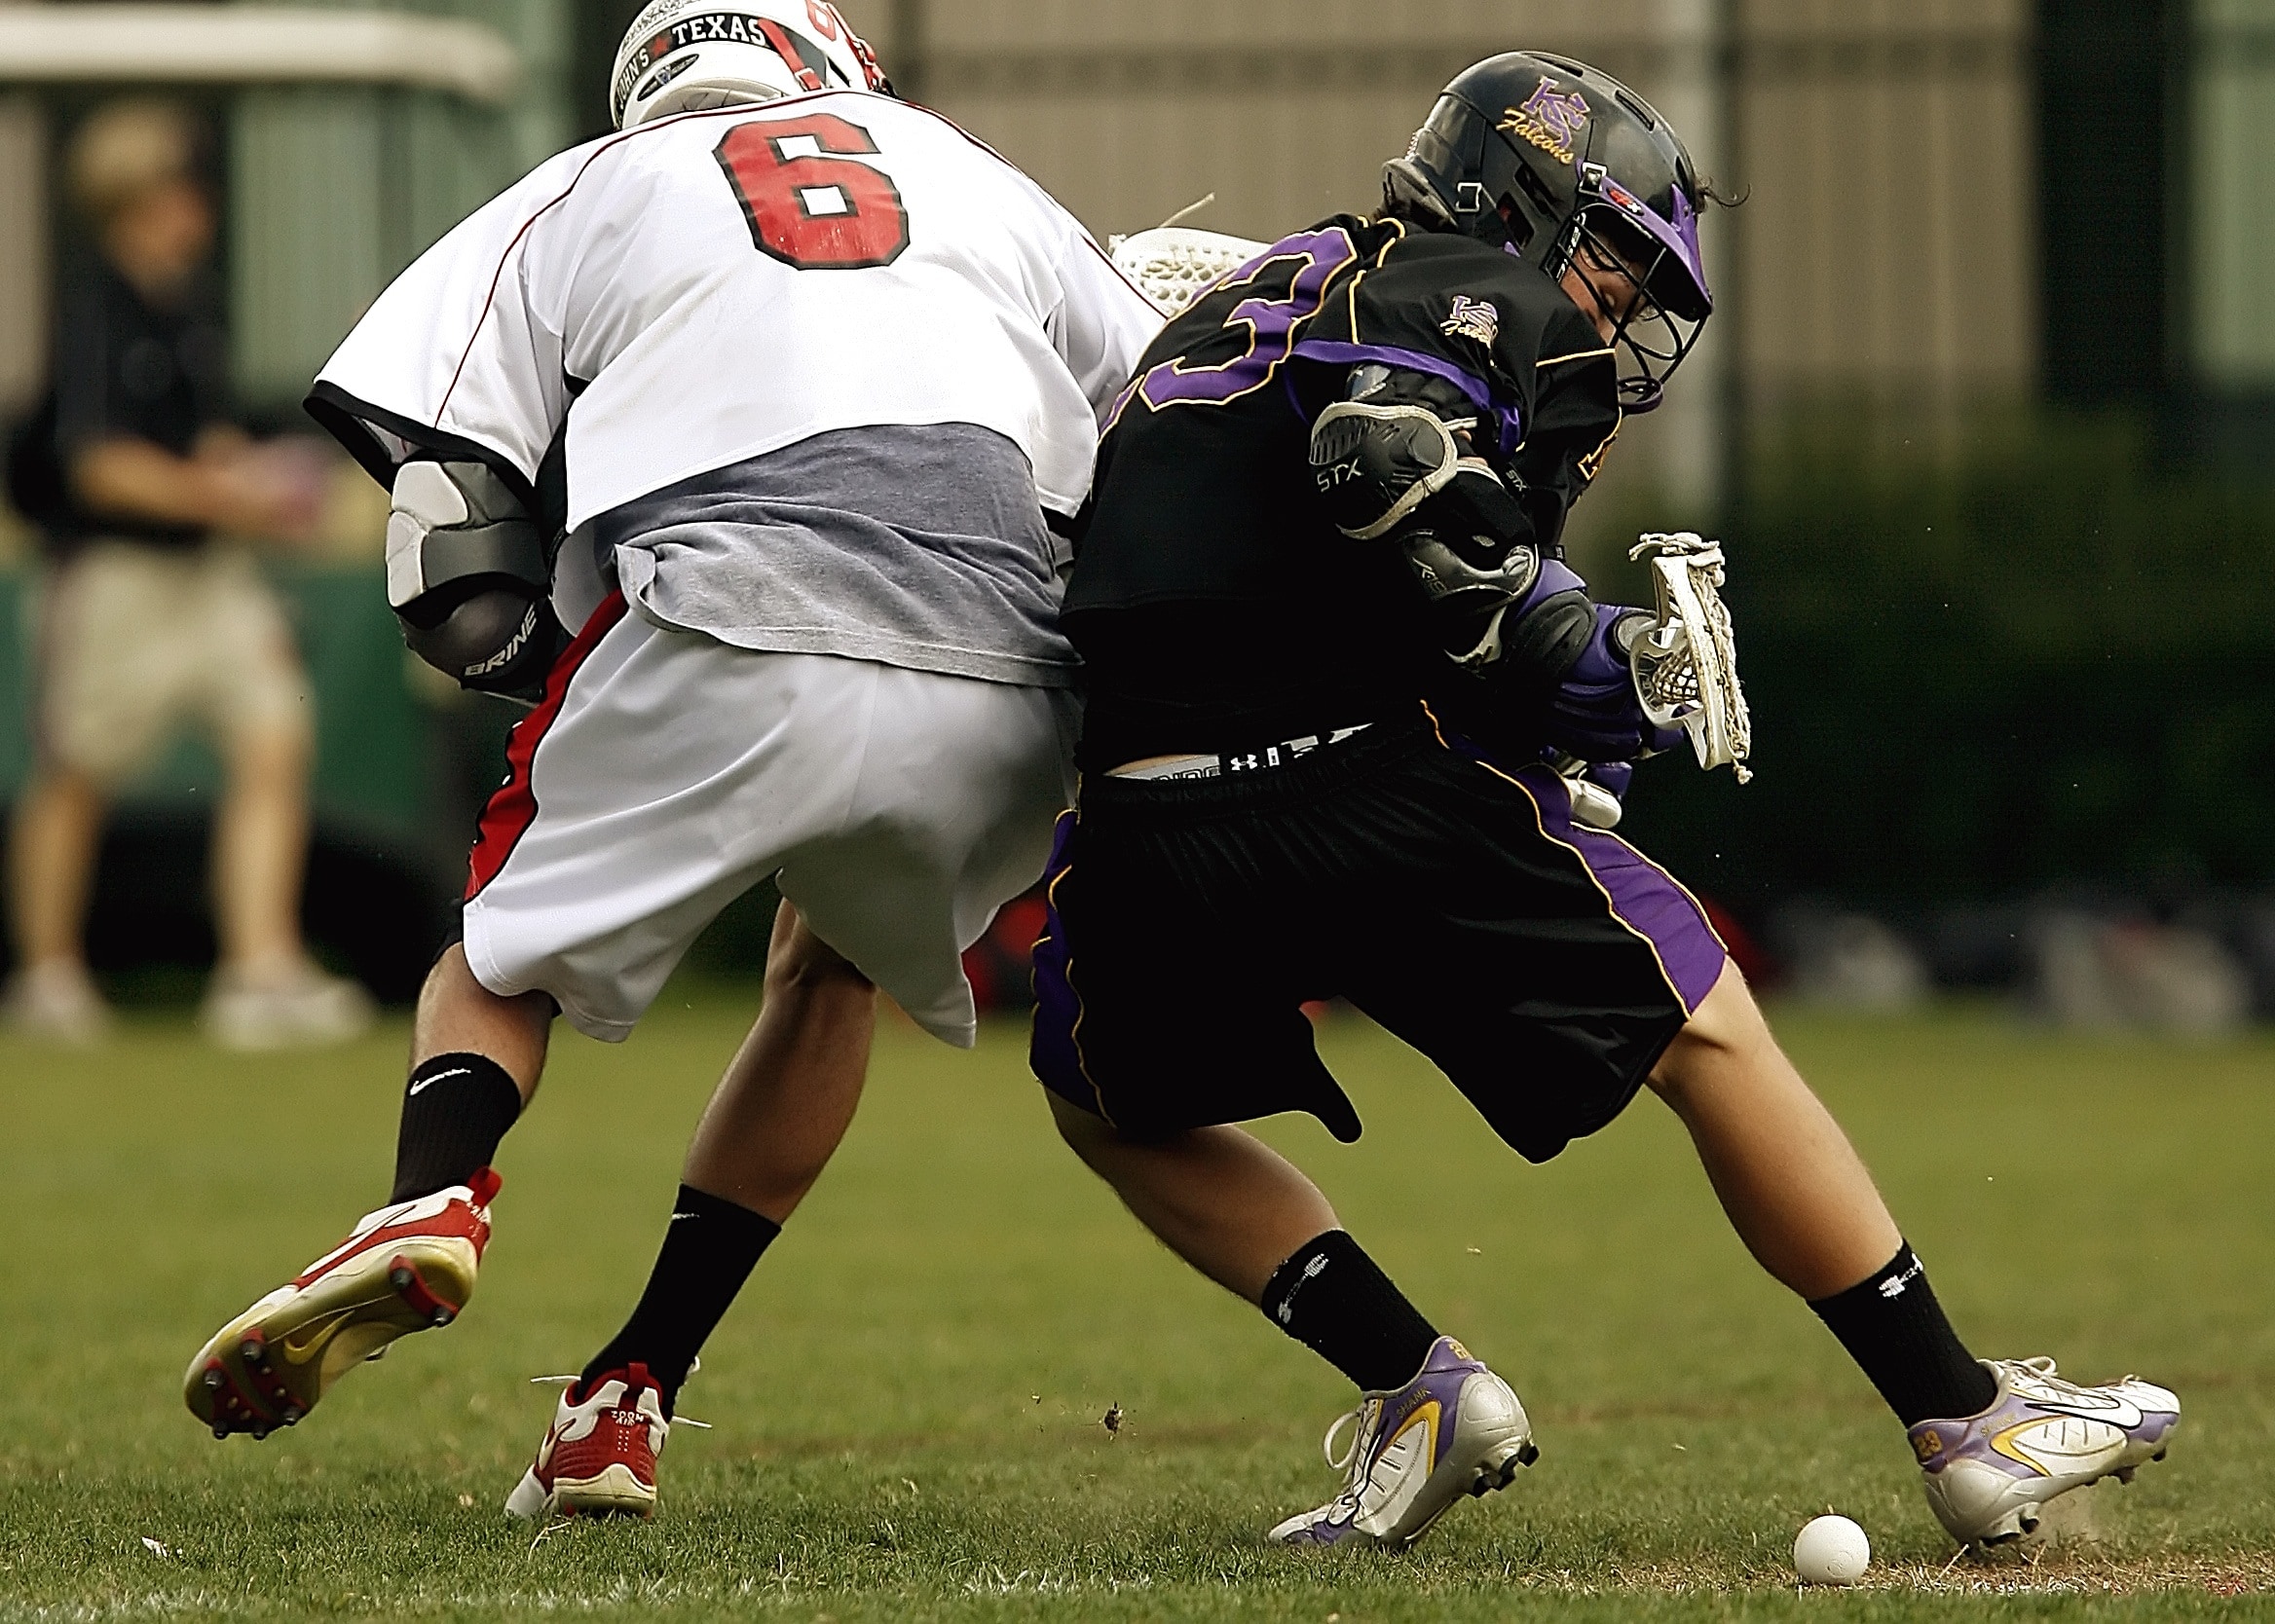 Lacrosse, Collision, Grass, Competition, sport, competitive sport